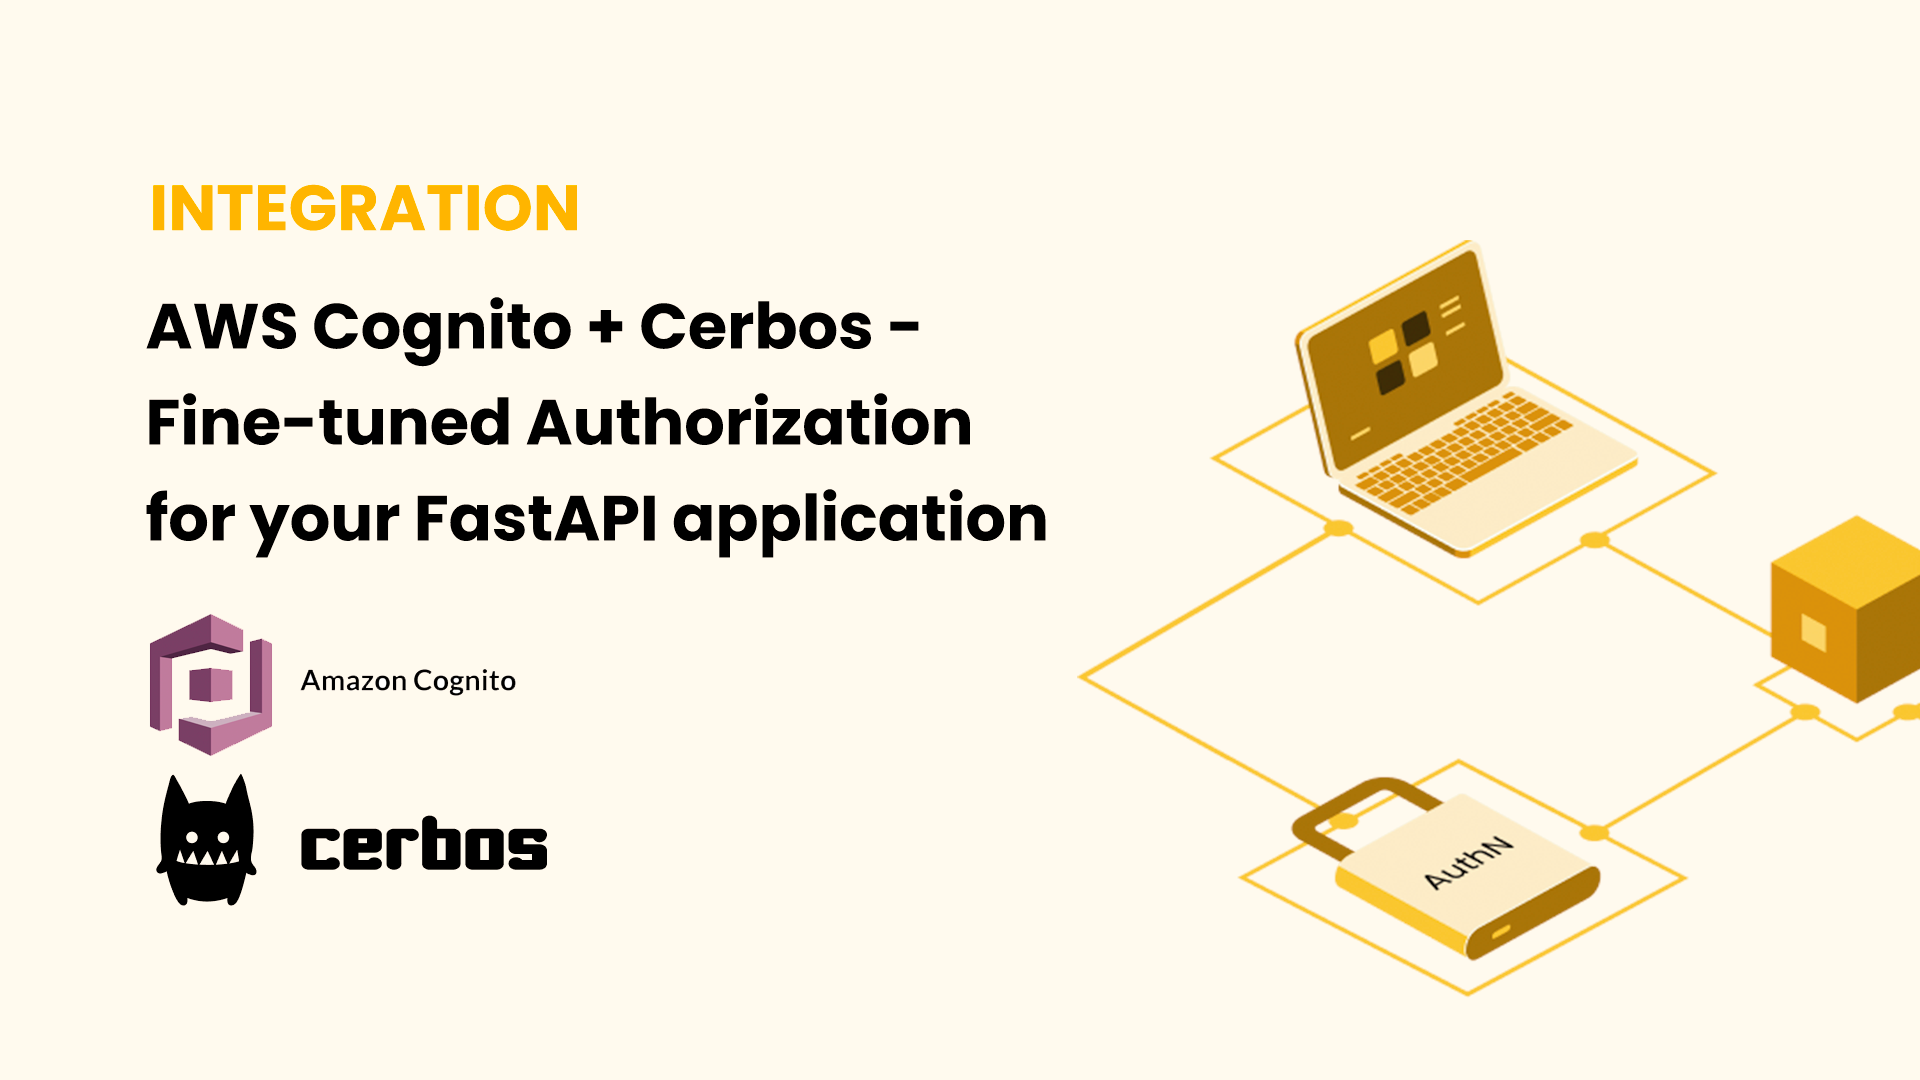 AWS Cognito + Cerbos - Fine-tuned Authorization for your FastAPI application